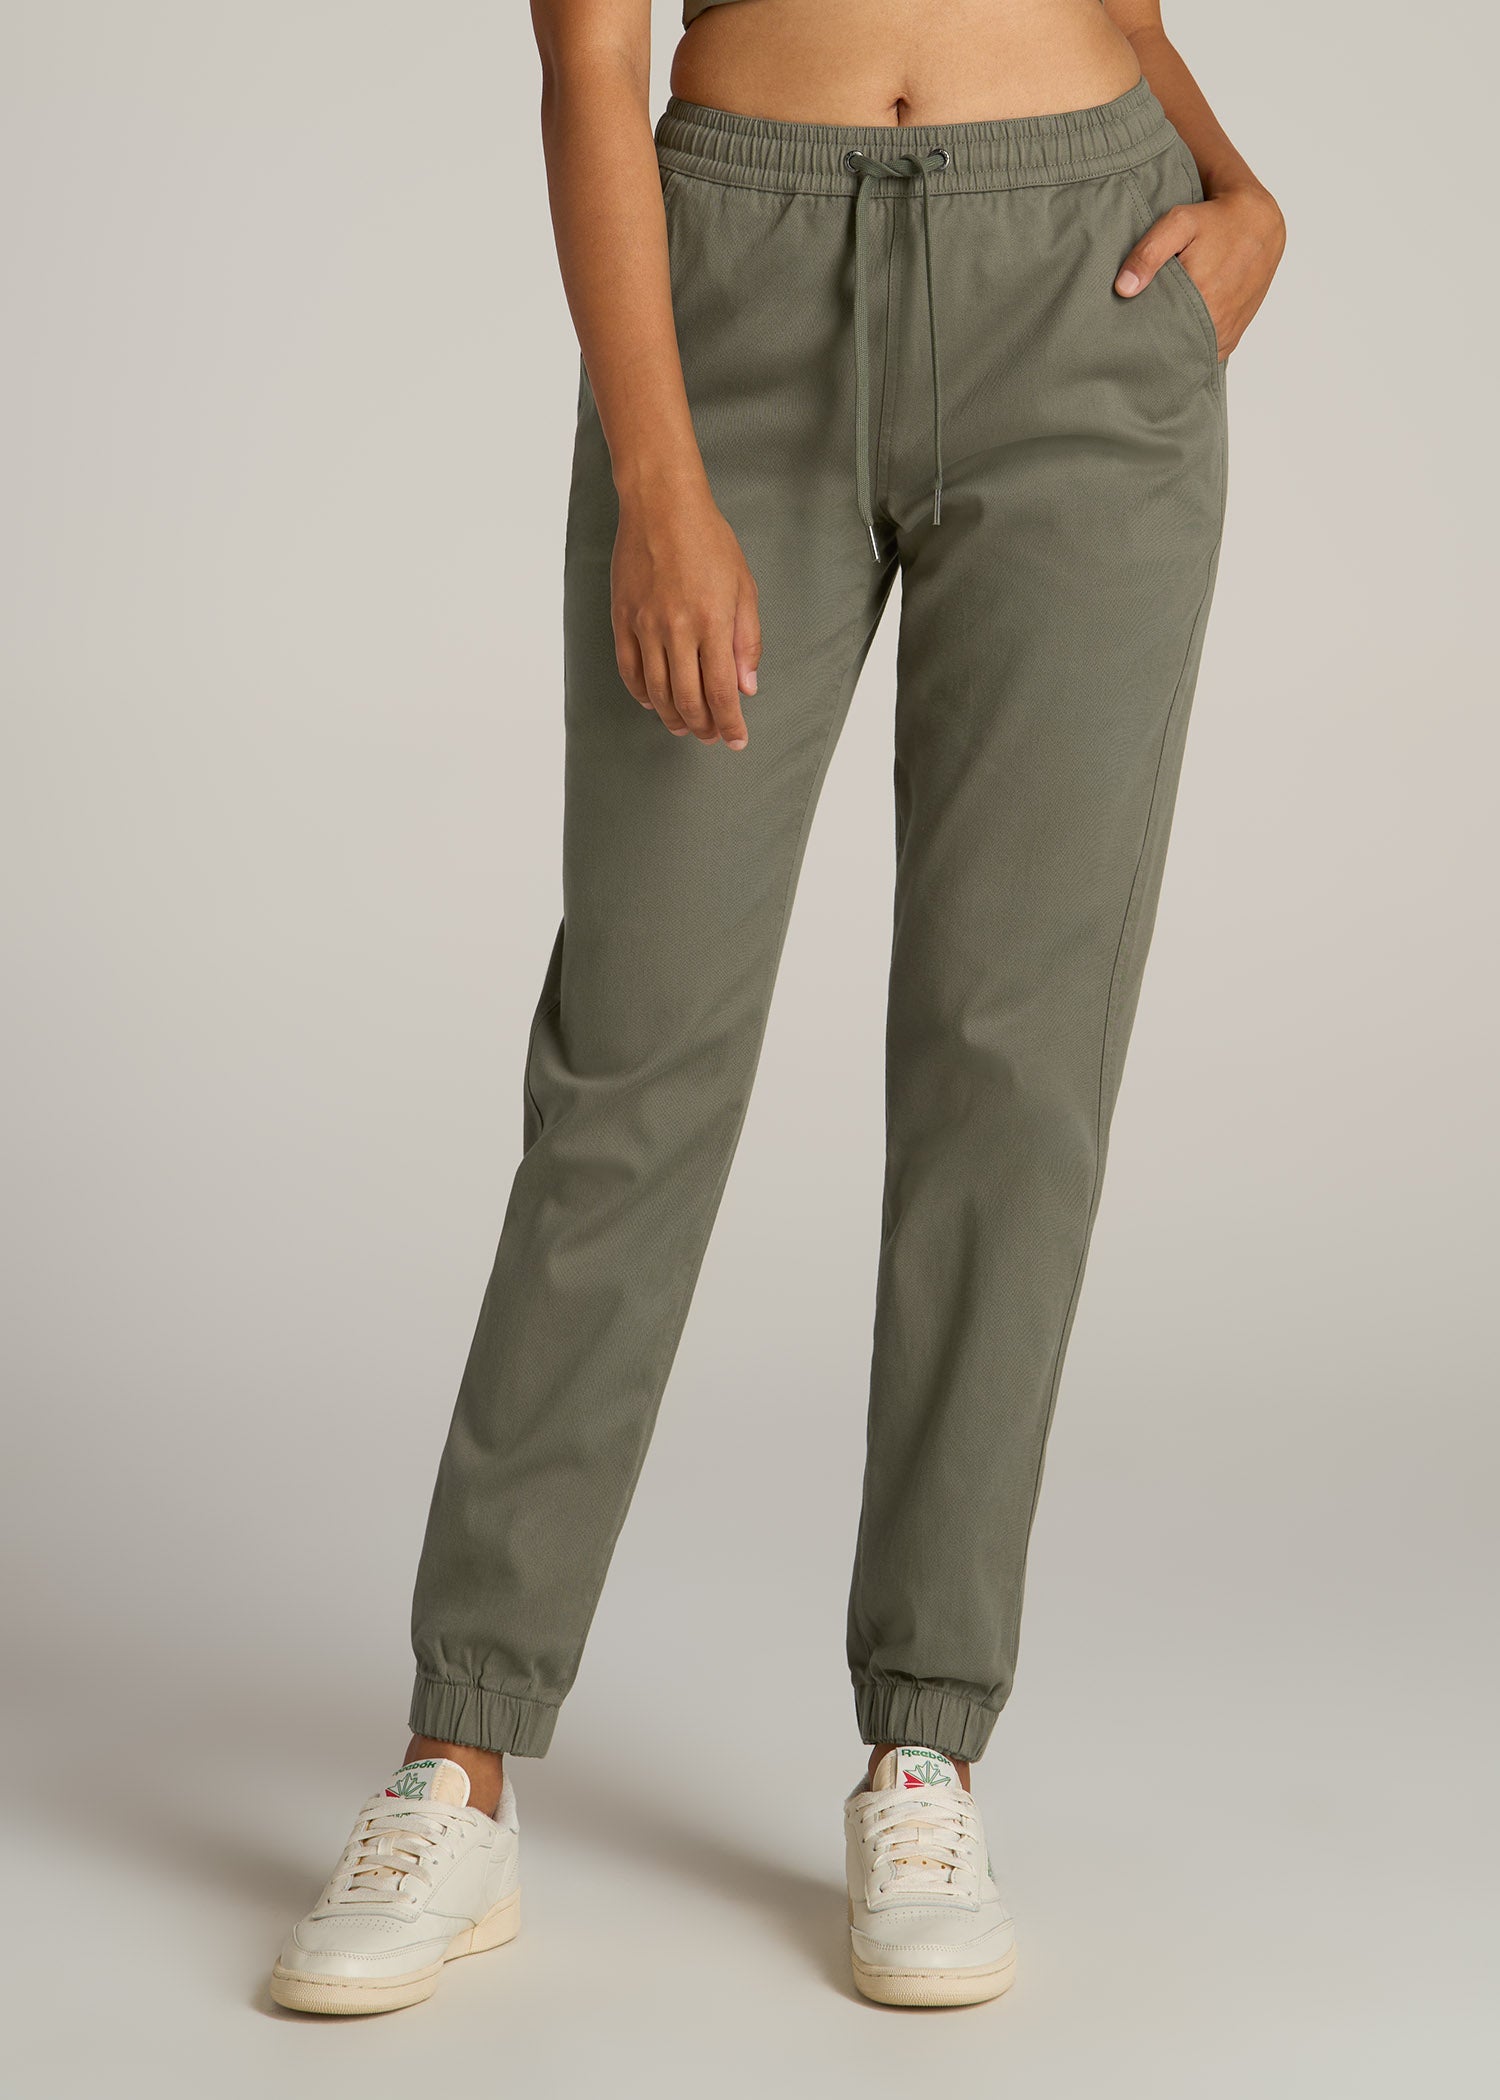 Eco-friendly Athleisure Ankle Length Pants for Tall Women extra Long 32  Inseam, 34 Inseam, 36 Inseam 